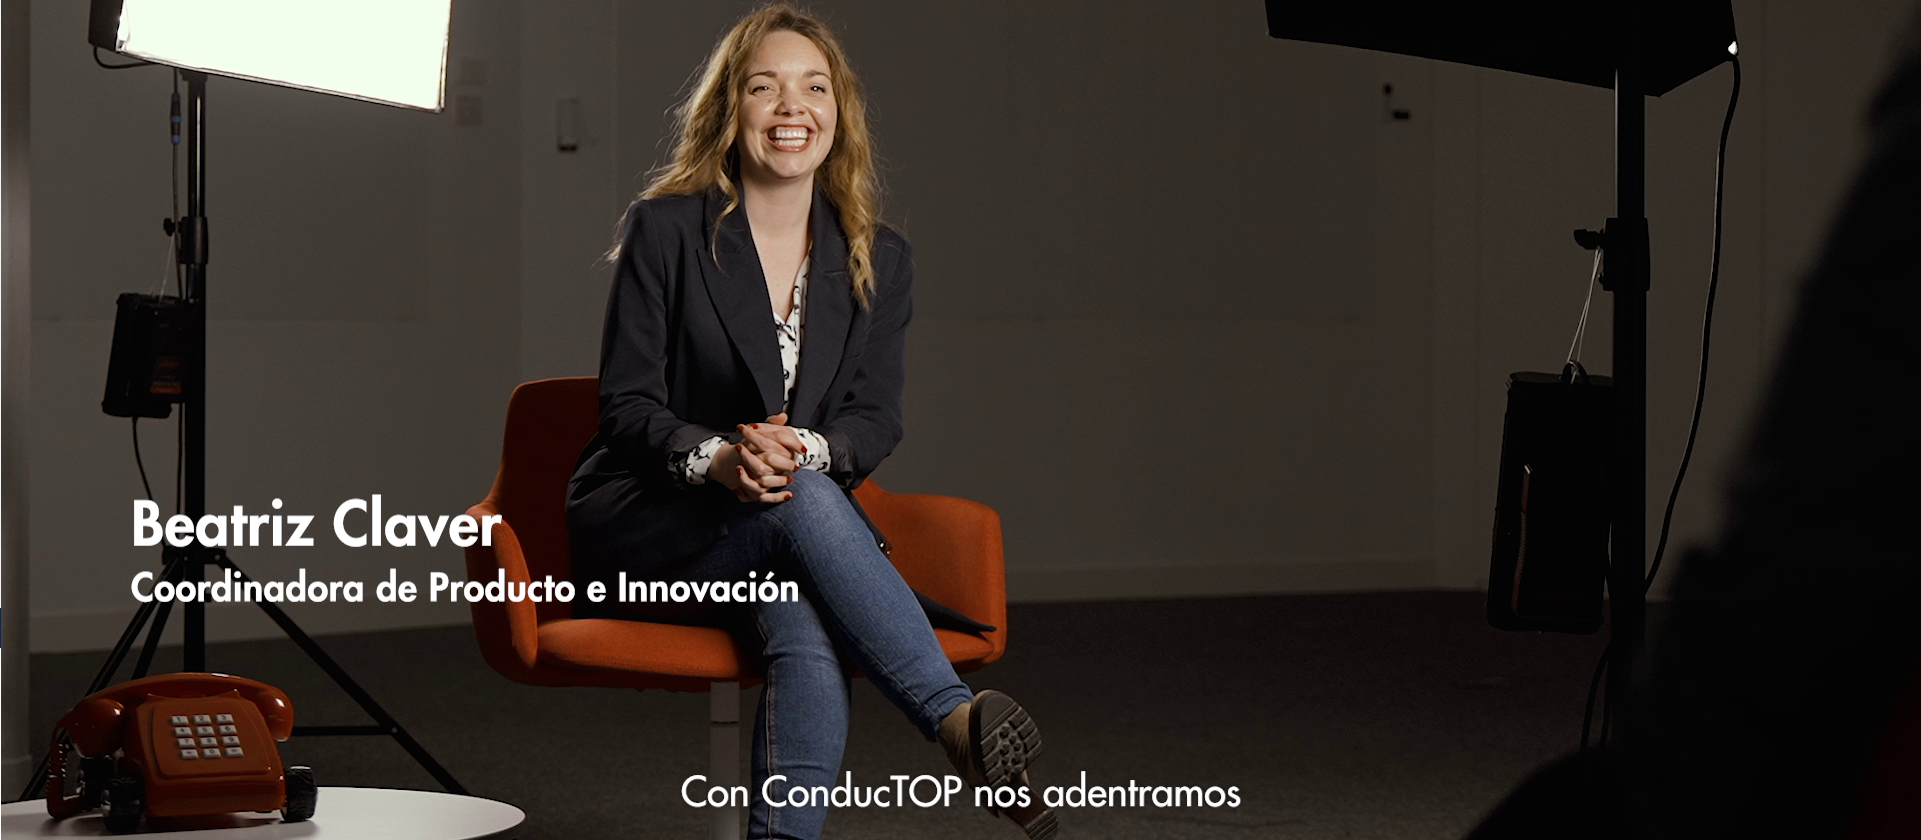 Beatriz Claver, Product and Innovation Coordinator, is the protagonist of this chapter